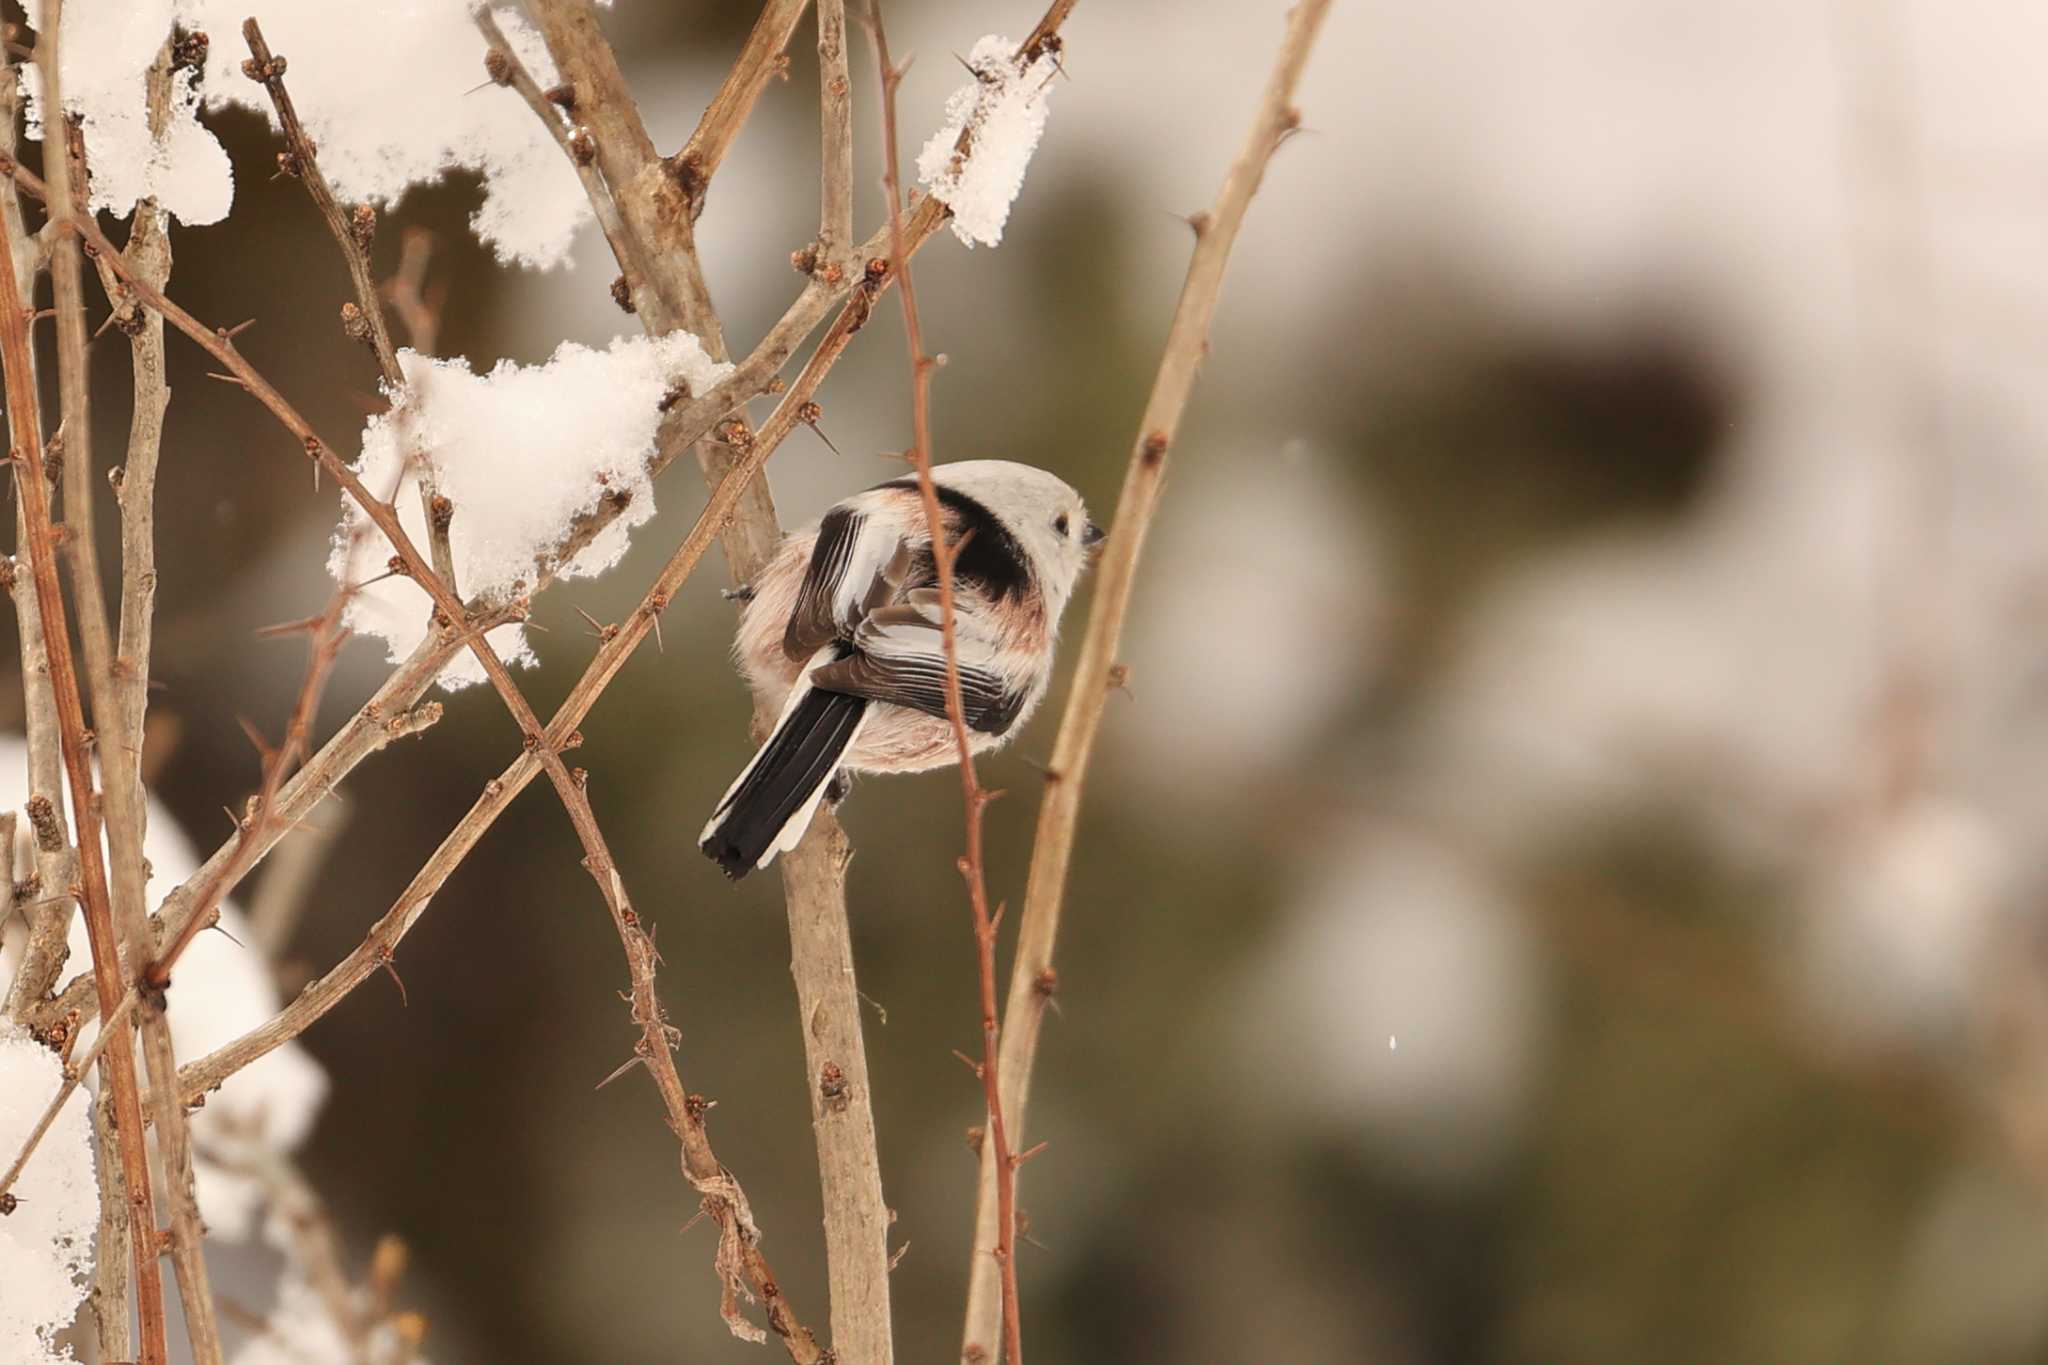 Photo of Long-tailed tit(japonicus) at Tomakomai Experimental Forest by かちこ